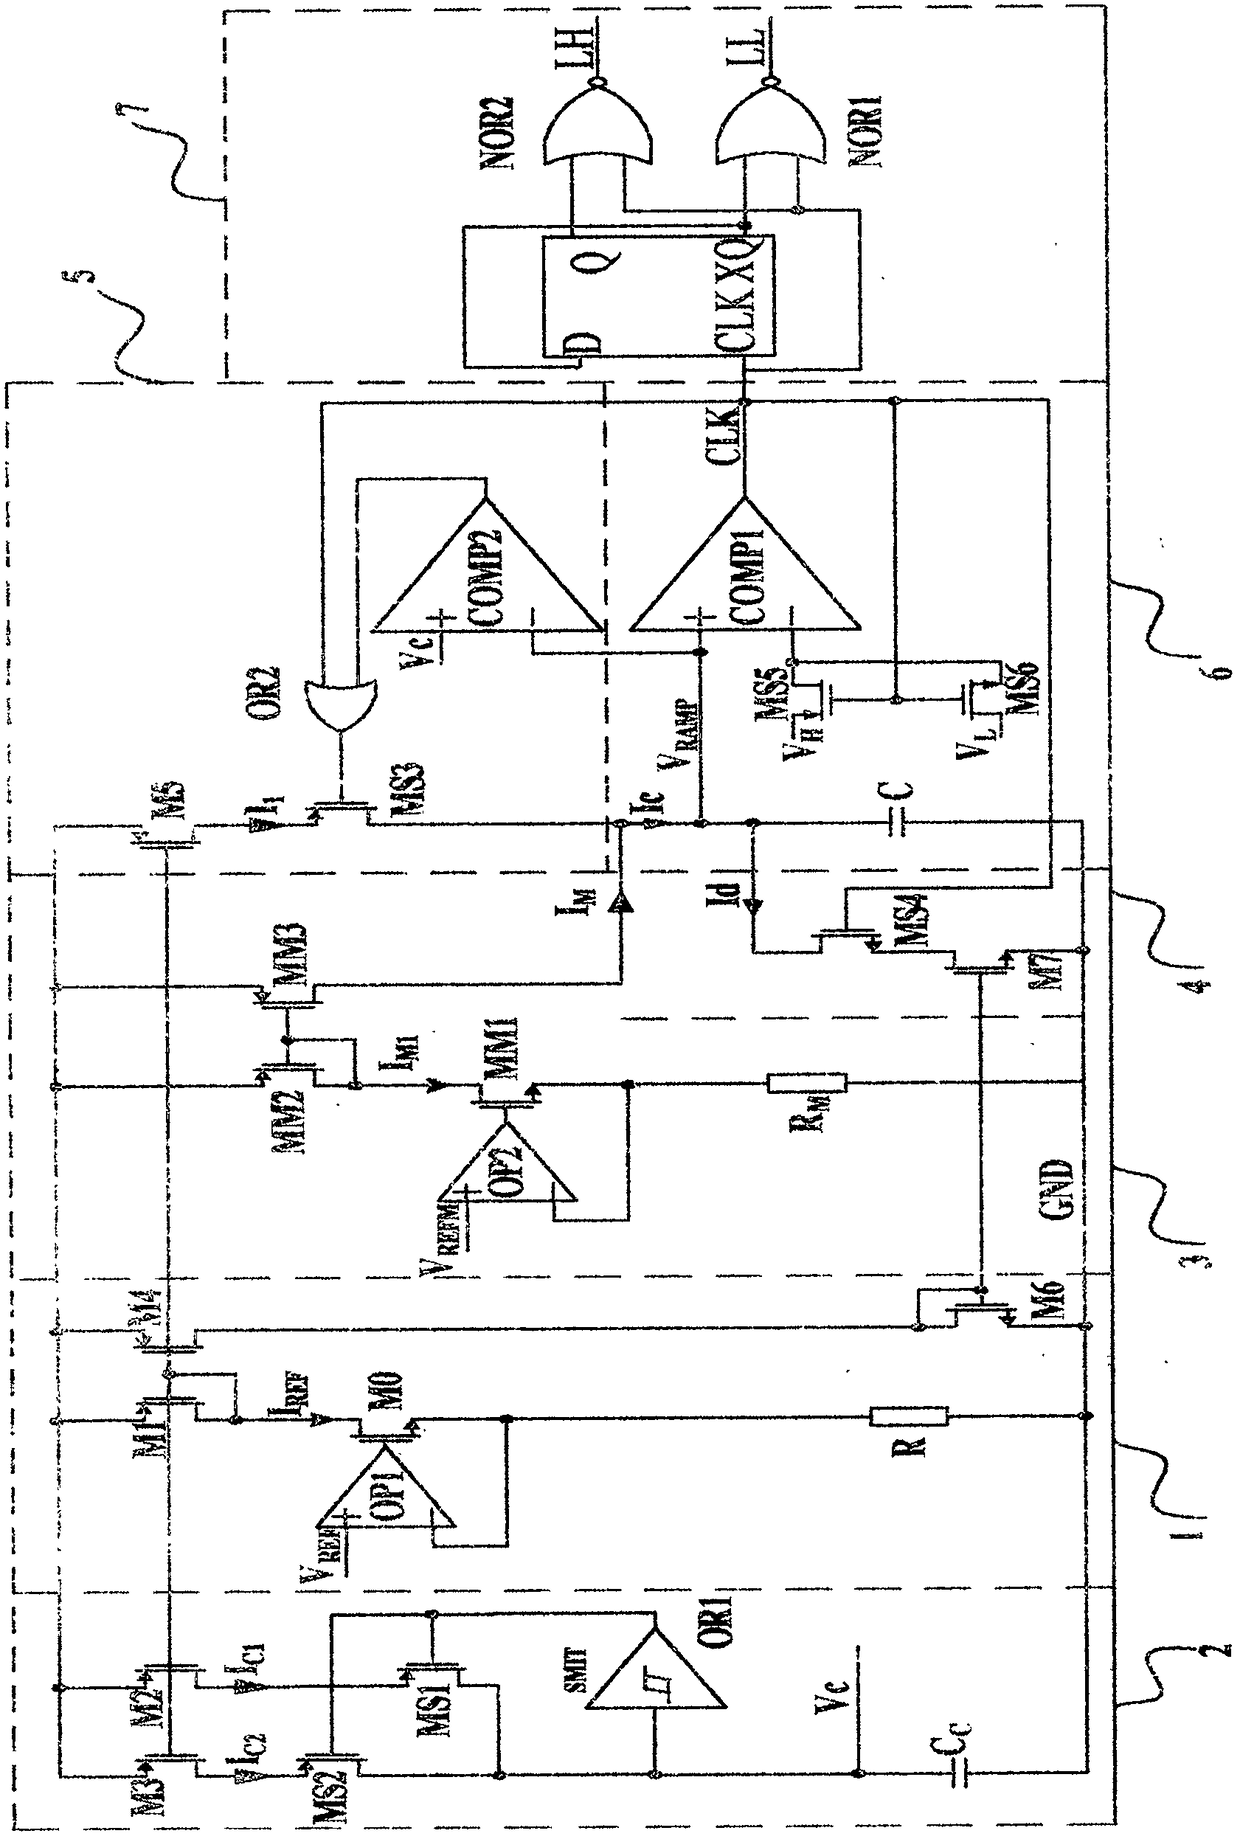 Multi-frequency oscillator with dead time in electronic ballast